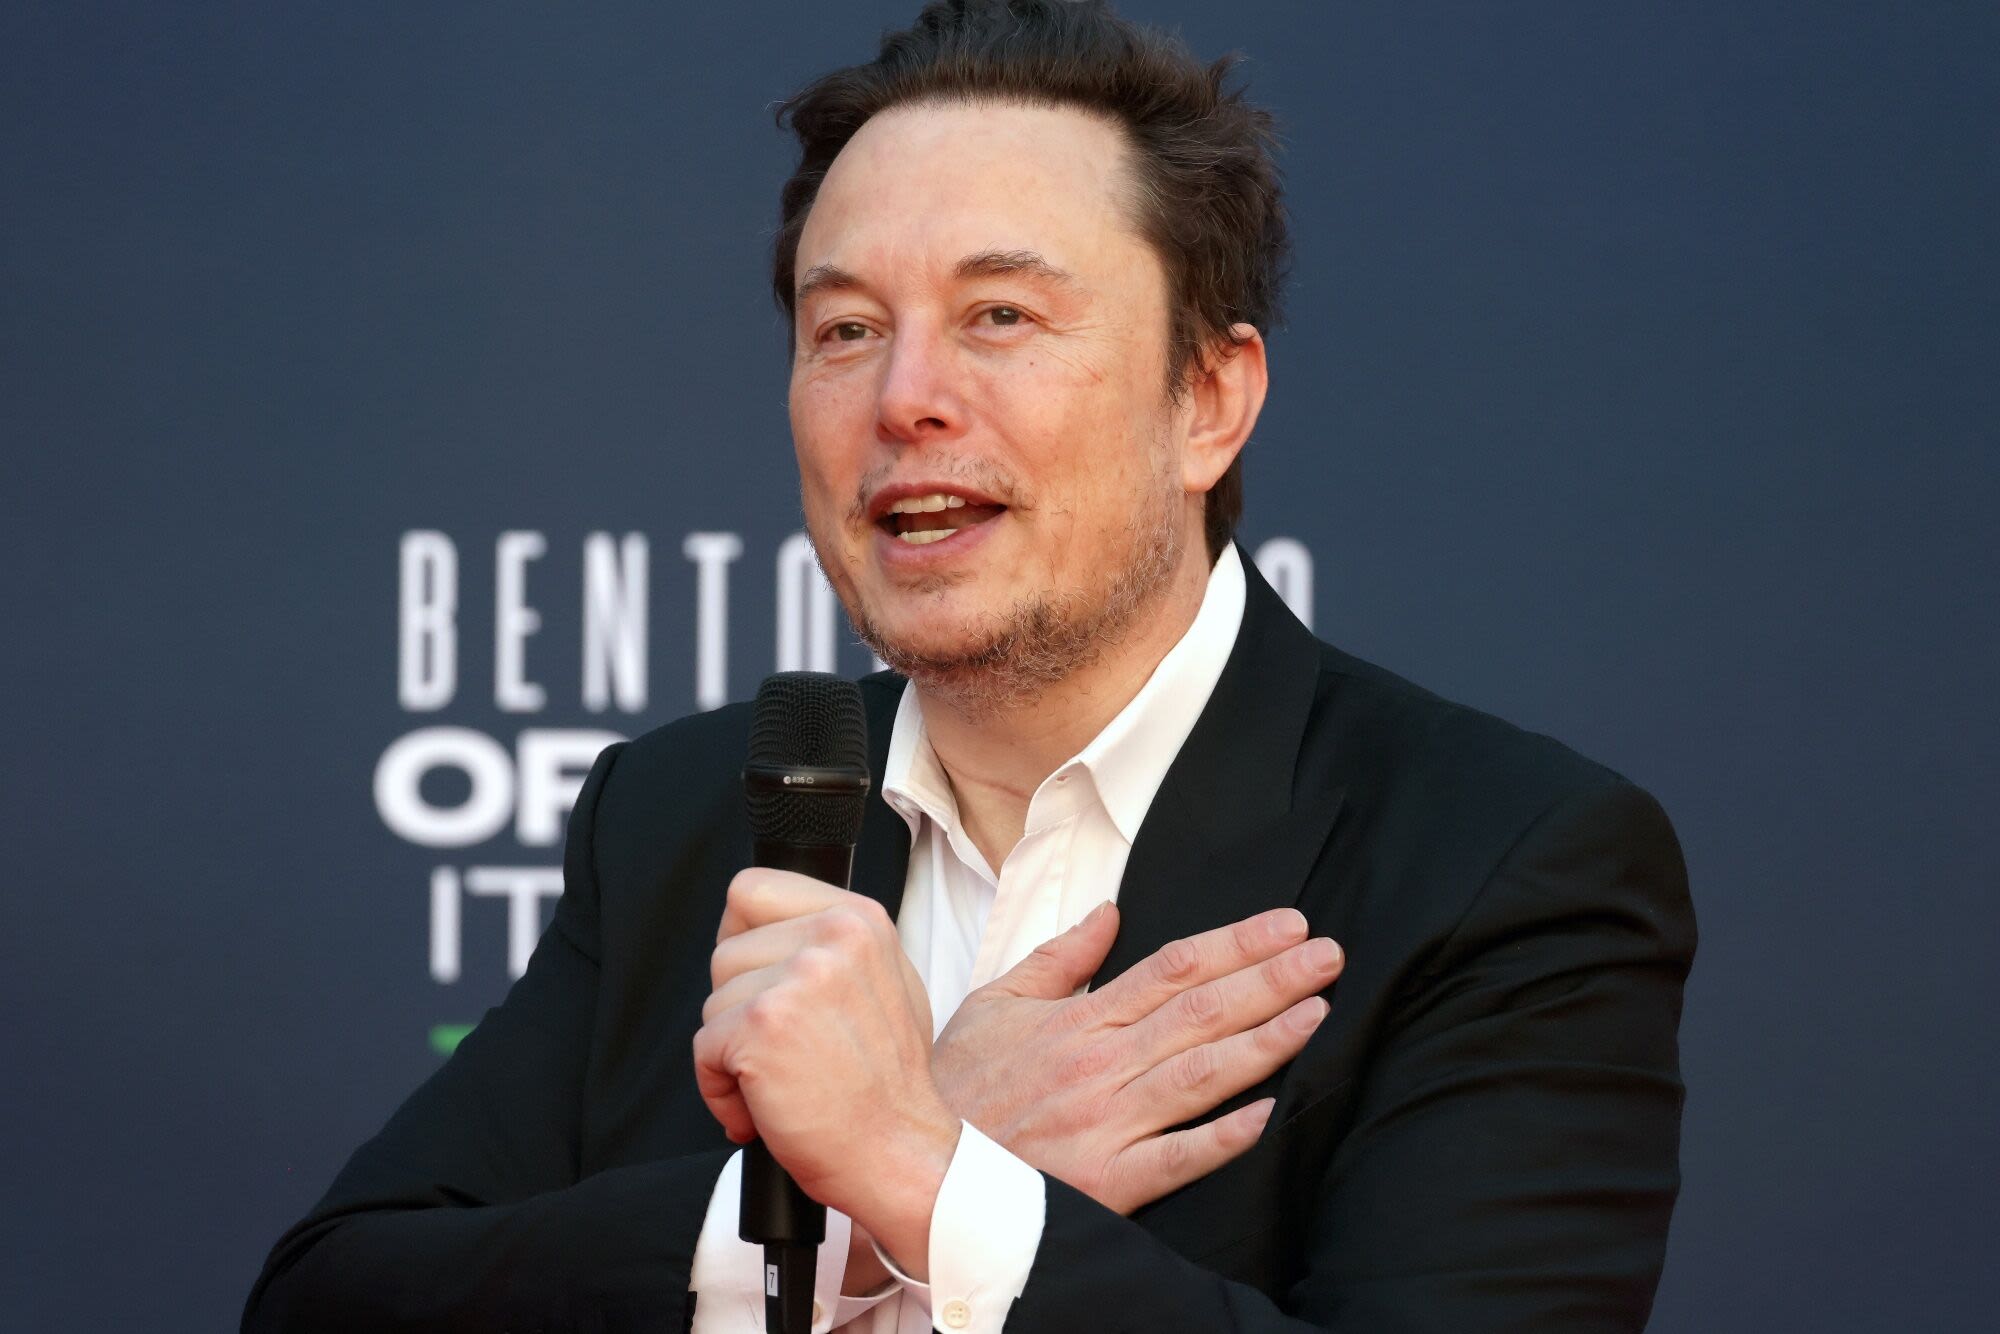 Musk’s Fortune Soars by Most Since Before Twitter Purchase